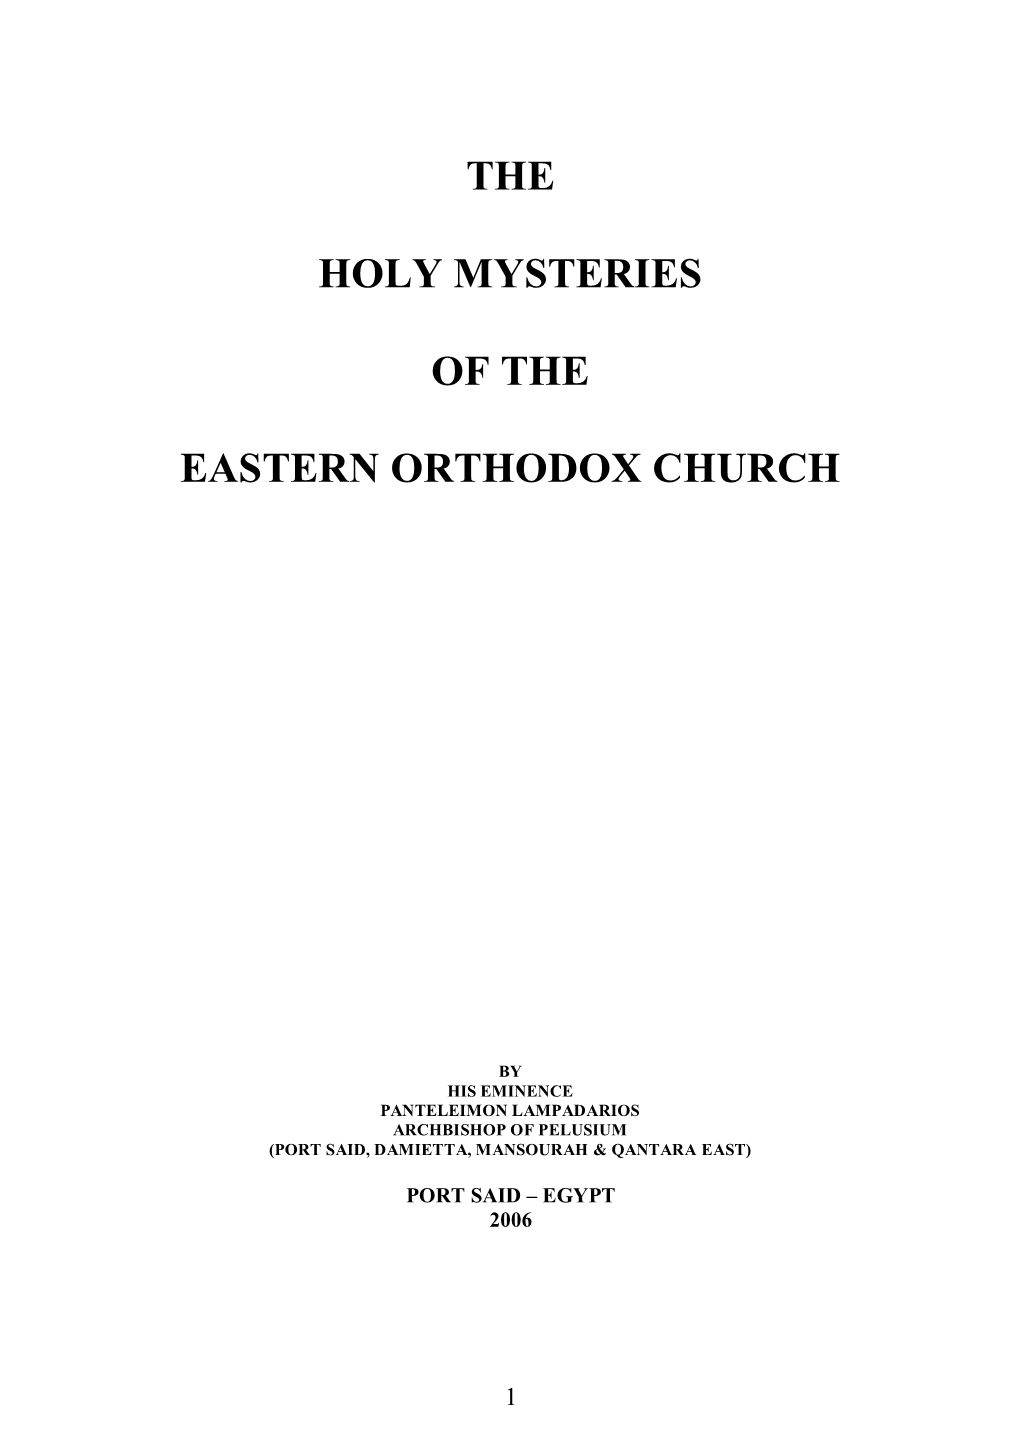 The Holy Mysteries of the Eastern Orthodox Church